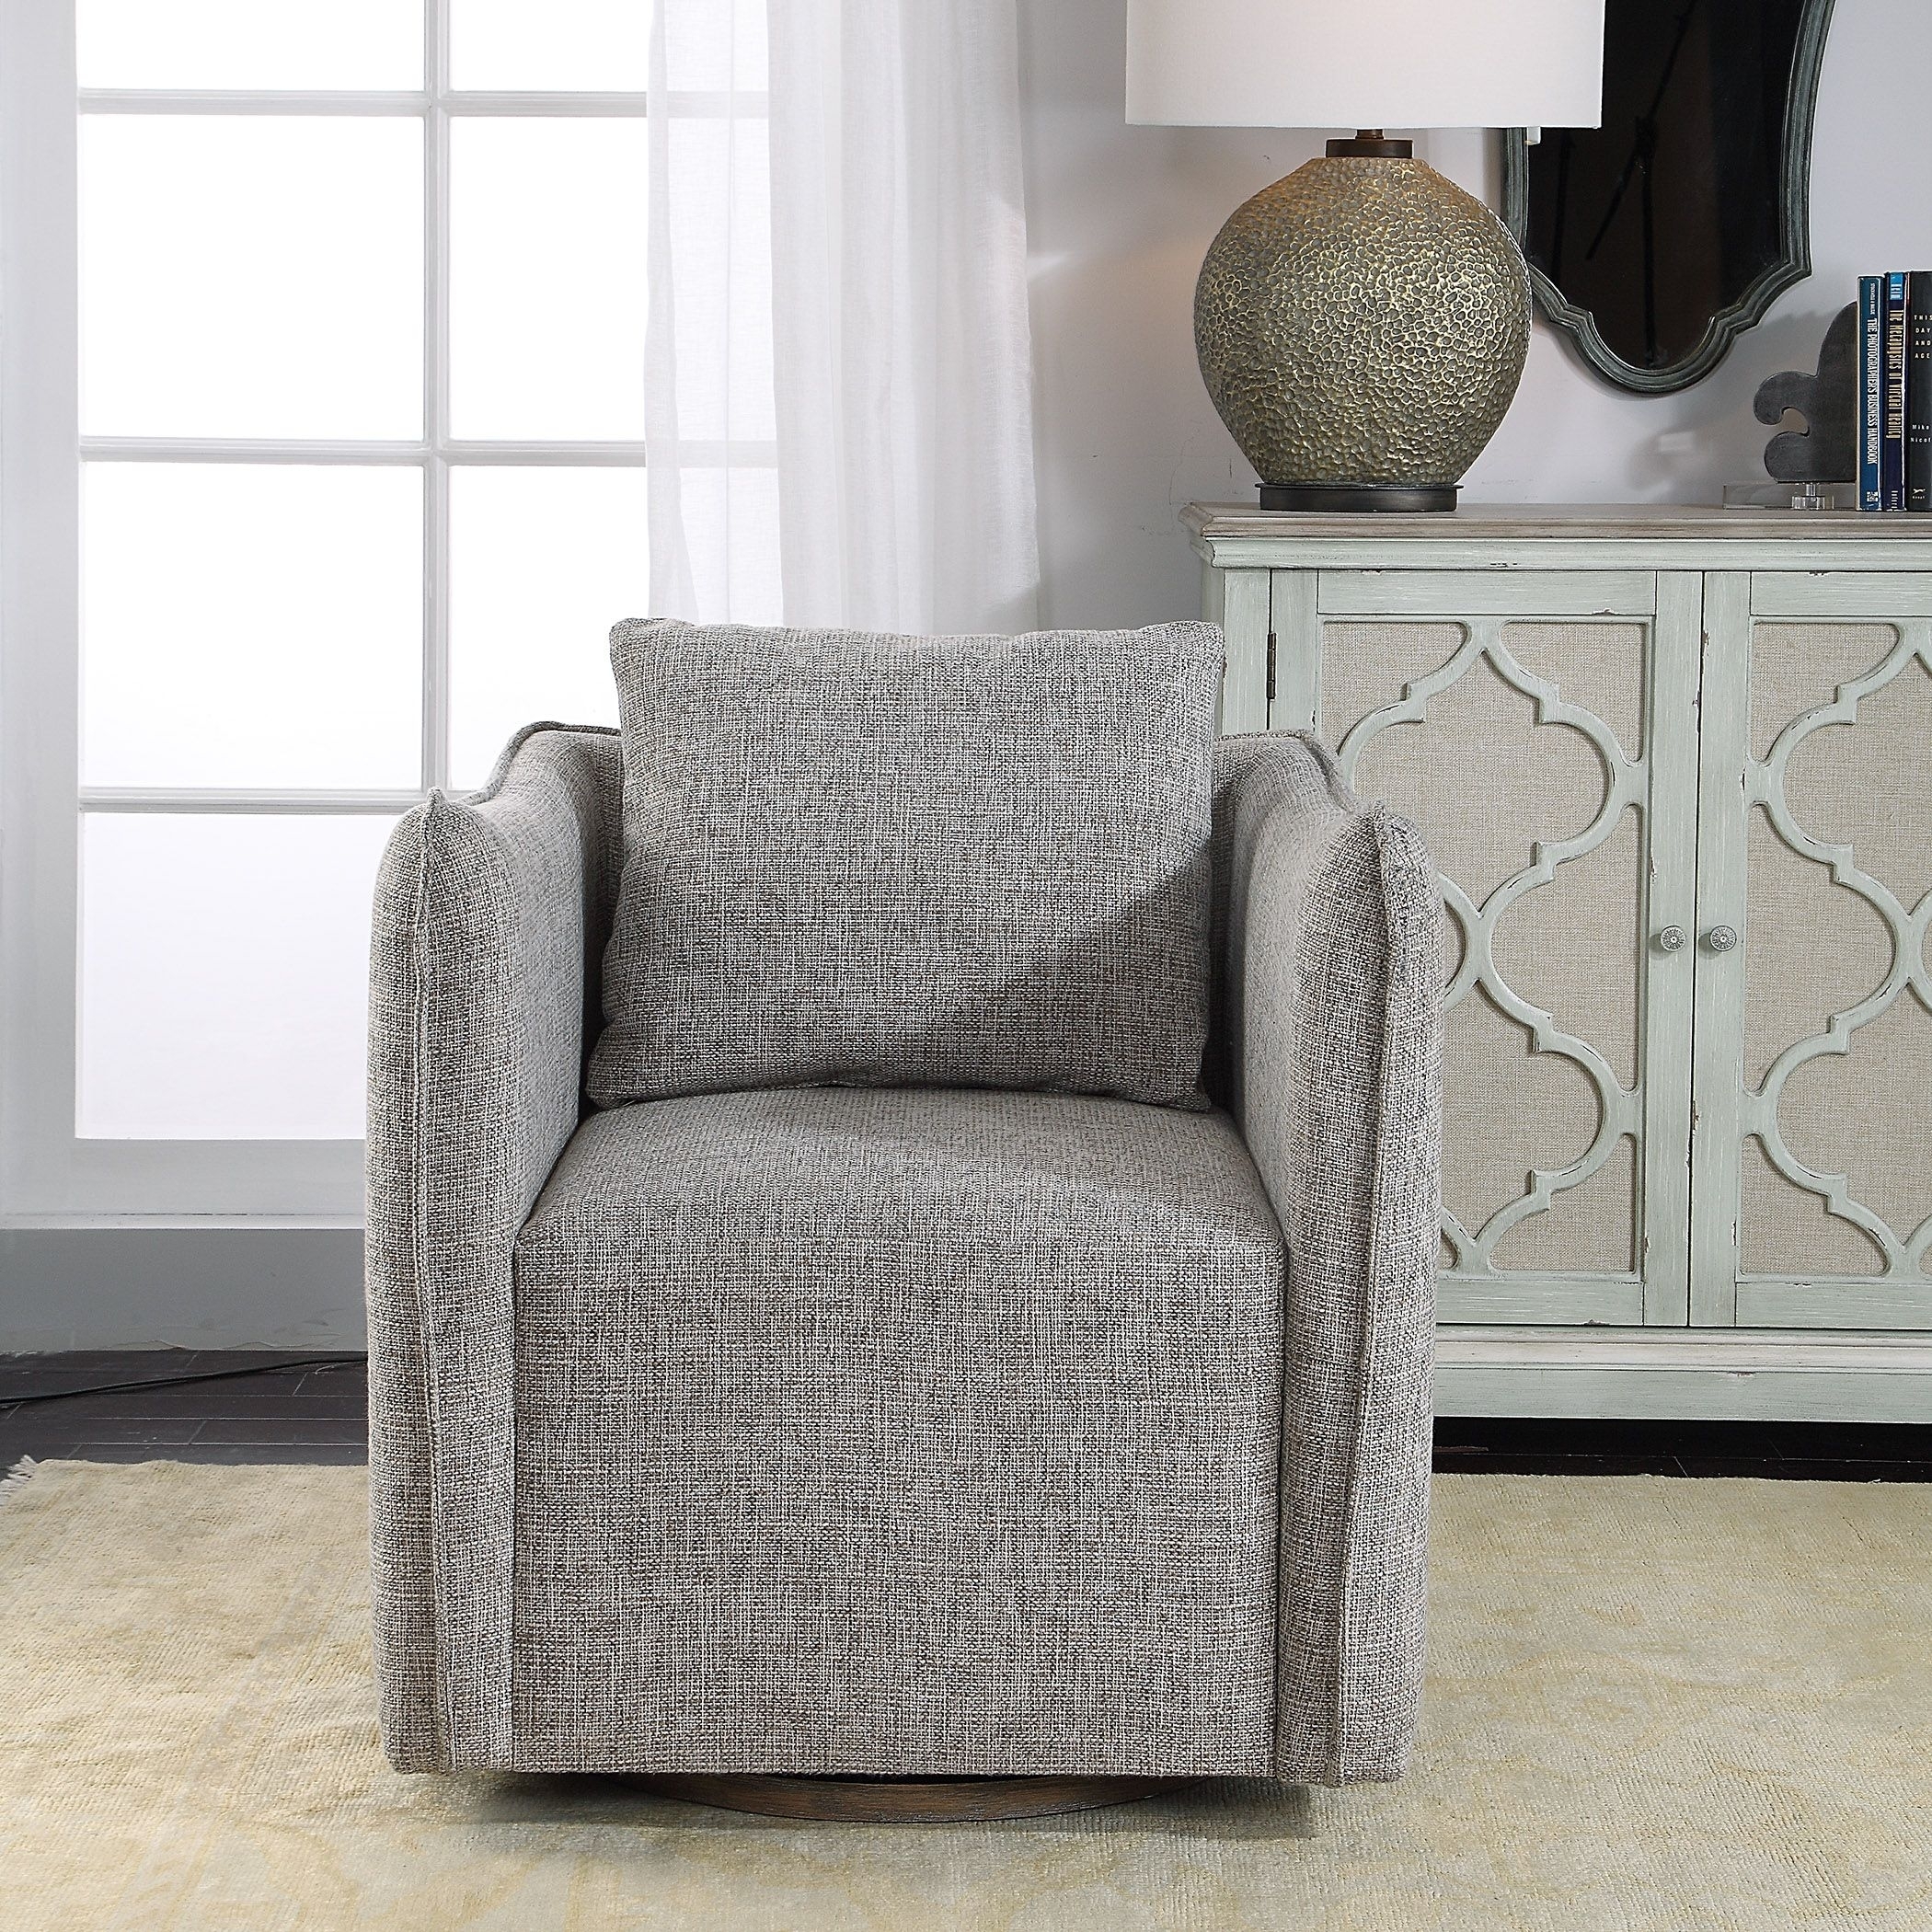 Aisling Swivel Chair - Image 3